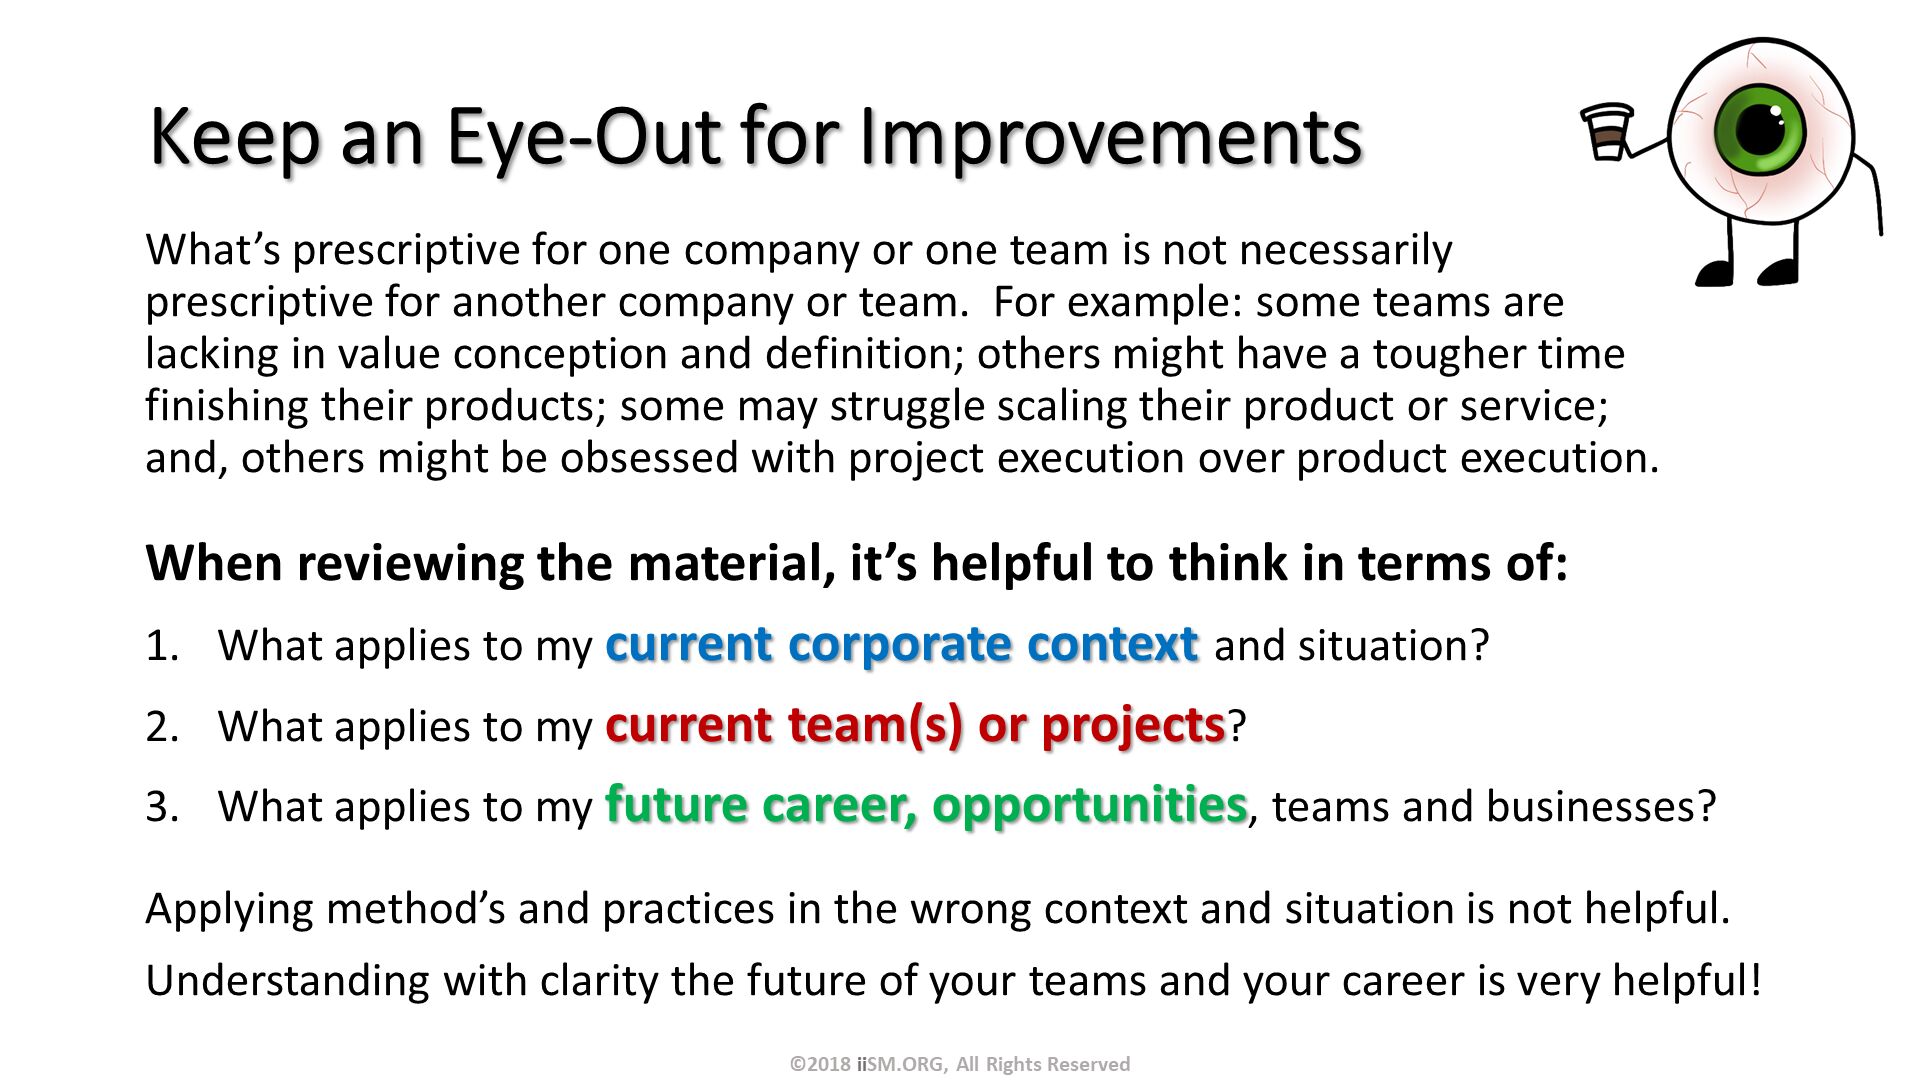 Keep an Eye-Out for Improvements. What’s prescriptive for one company or one team is not necessarily prescriptive for another company or team.  For example: some teams are lacking in value conception and definition; others might have a tougher time finishing their products; some may struggle scaling their product or service; and, others might be obsessed with project execution over product execution.
. When reviewing the material, it’s helpful to think in terms of:
What applies to my current corporate context and situation?
What applies to my current team(s) or projects?
What applies to my future career, opportunities, teams and businesses?
Applying method’s and practices in the wrong context and situation is not helpful.
Understanding with clarity the future of your teams and your career is very helpful!. ©2018 iiSM.ORG, All Rights Reserved. 